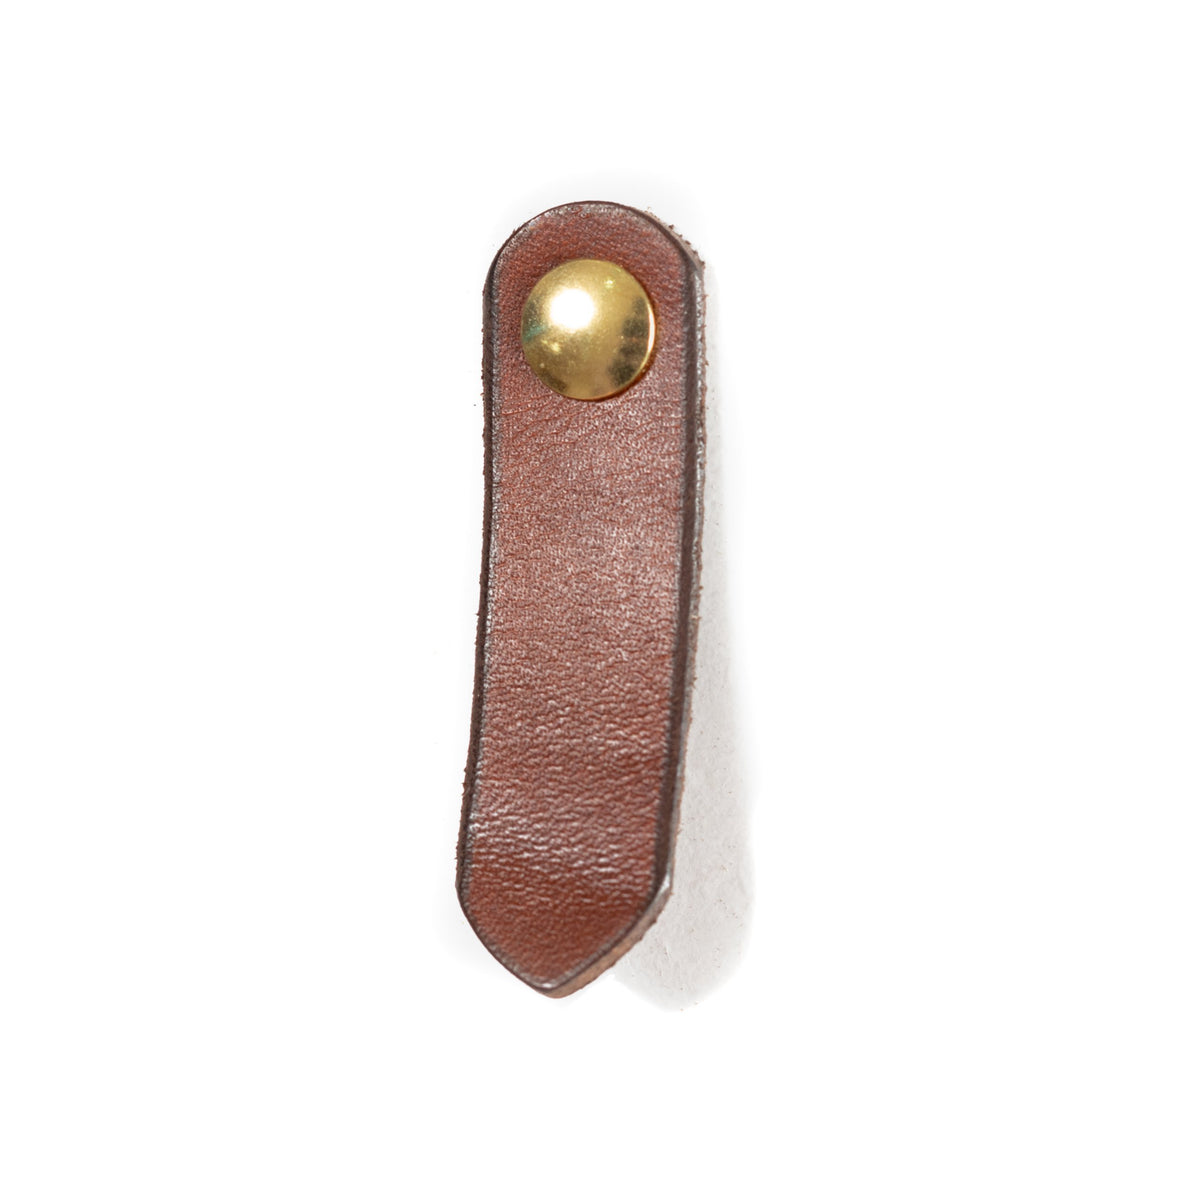 Walnut Studiolo AS-IS AS-IS SALE Leather Tab Pull - The St. Johns Dark Brown / Nickel